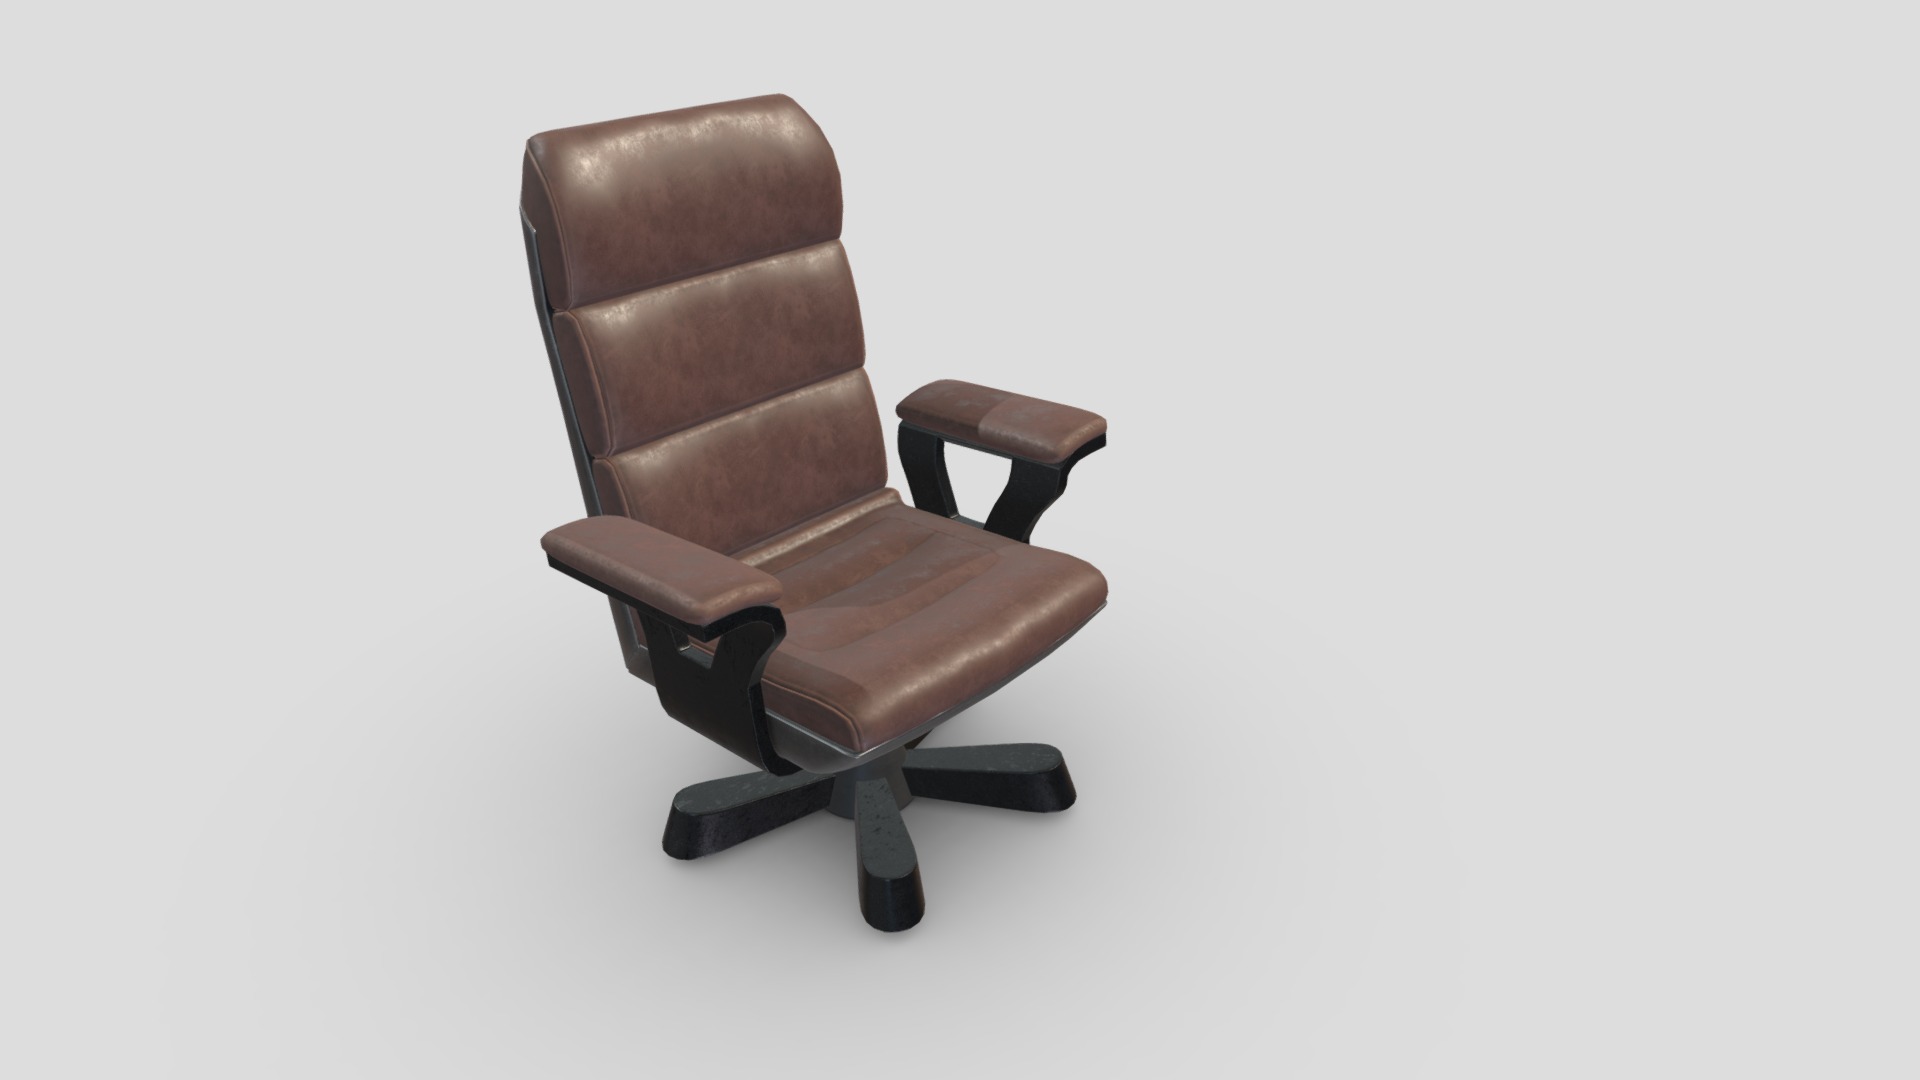 3D model Arm Chair 13 - This is a 3D model of the Arm Chair 13. The 3D model is about a brown leather chair.